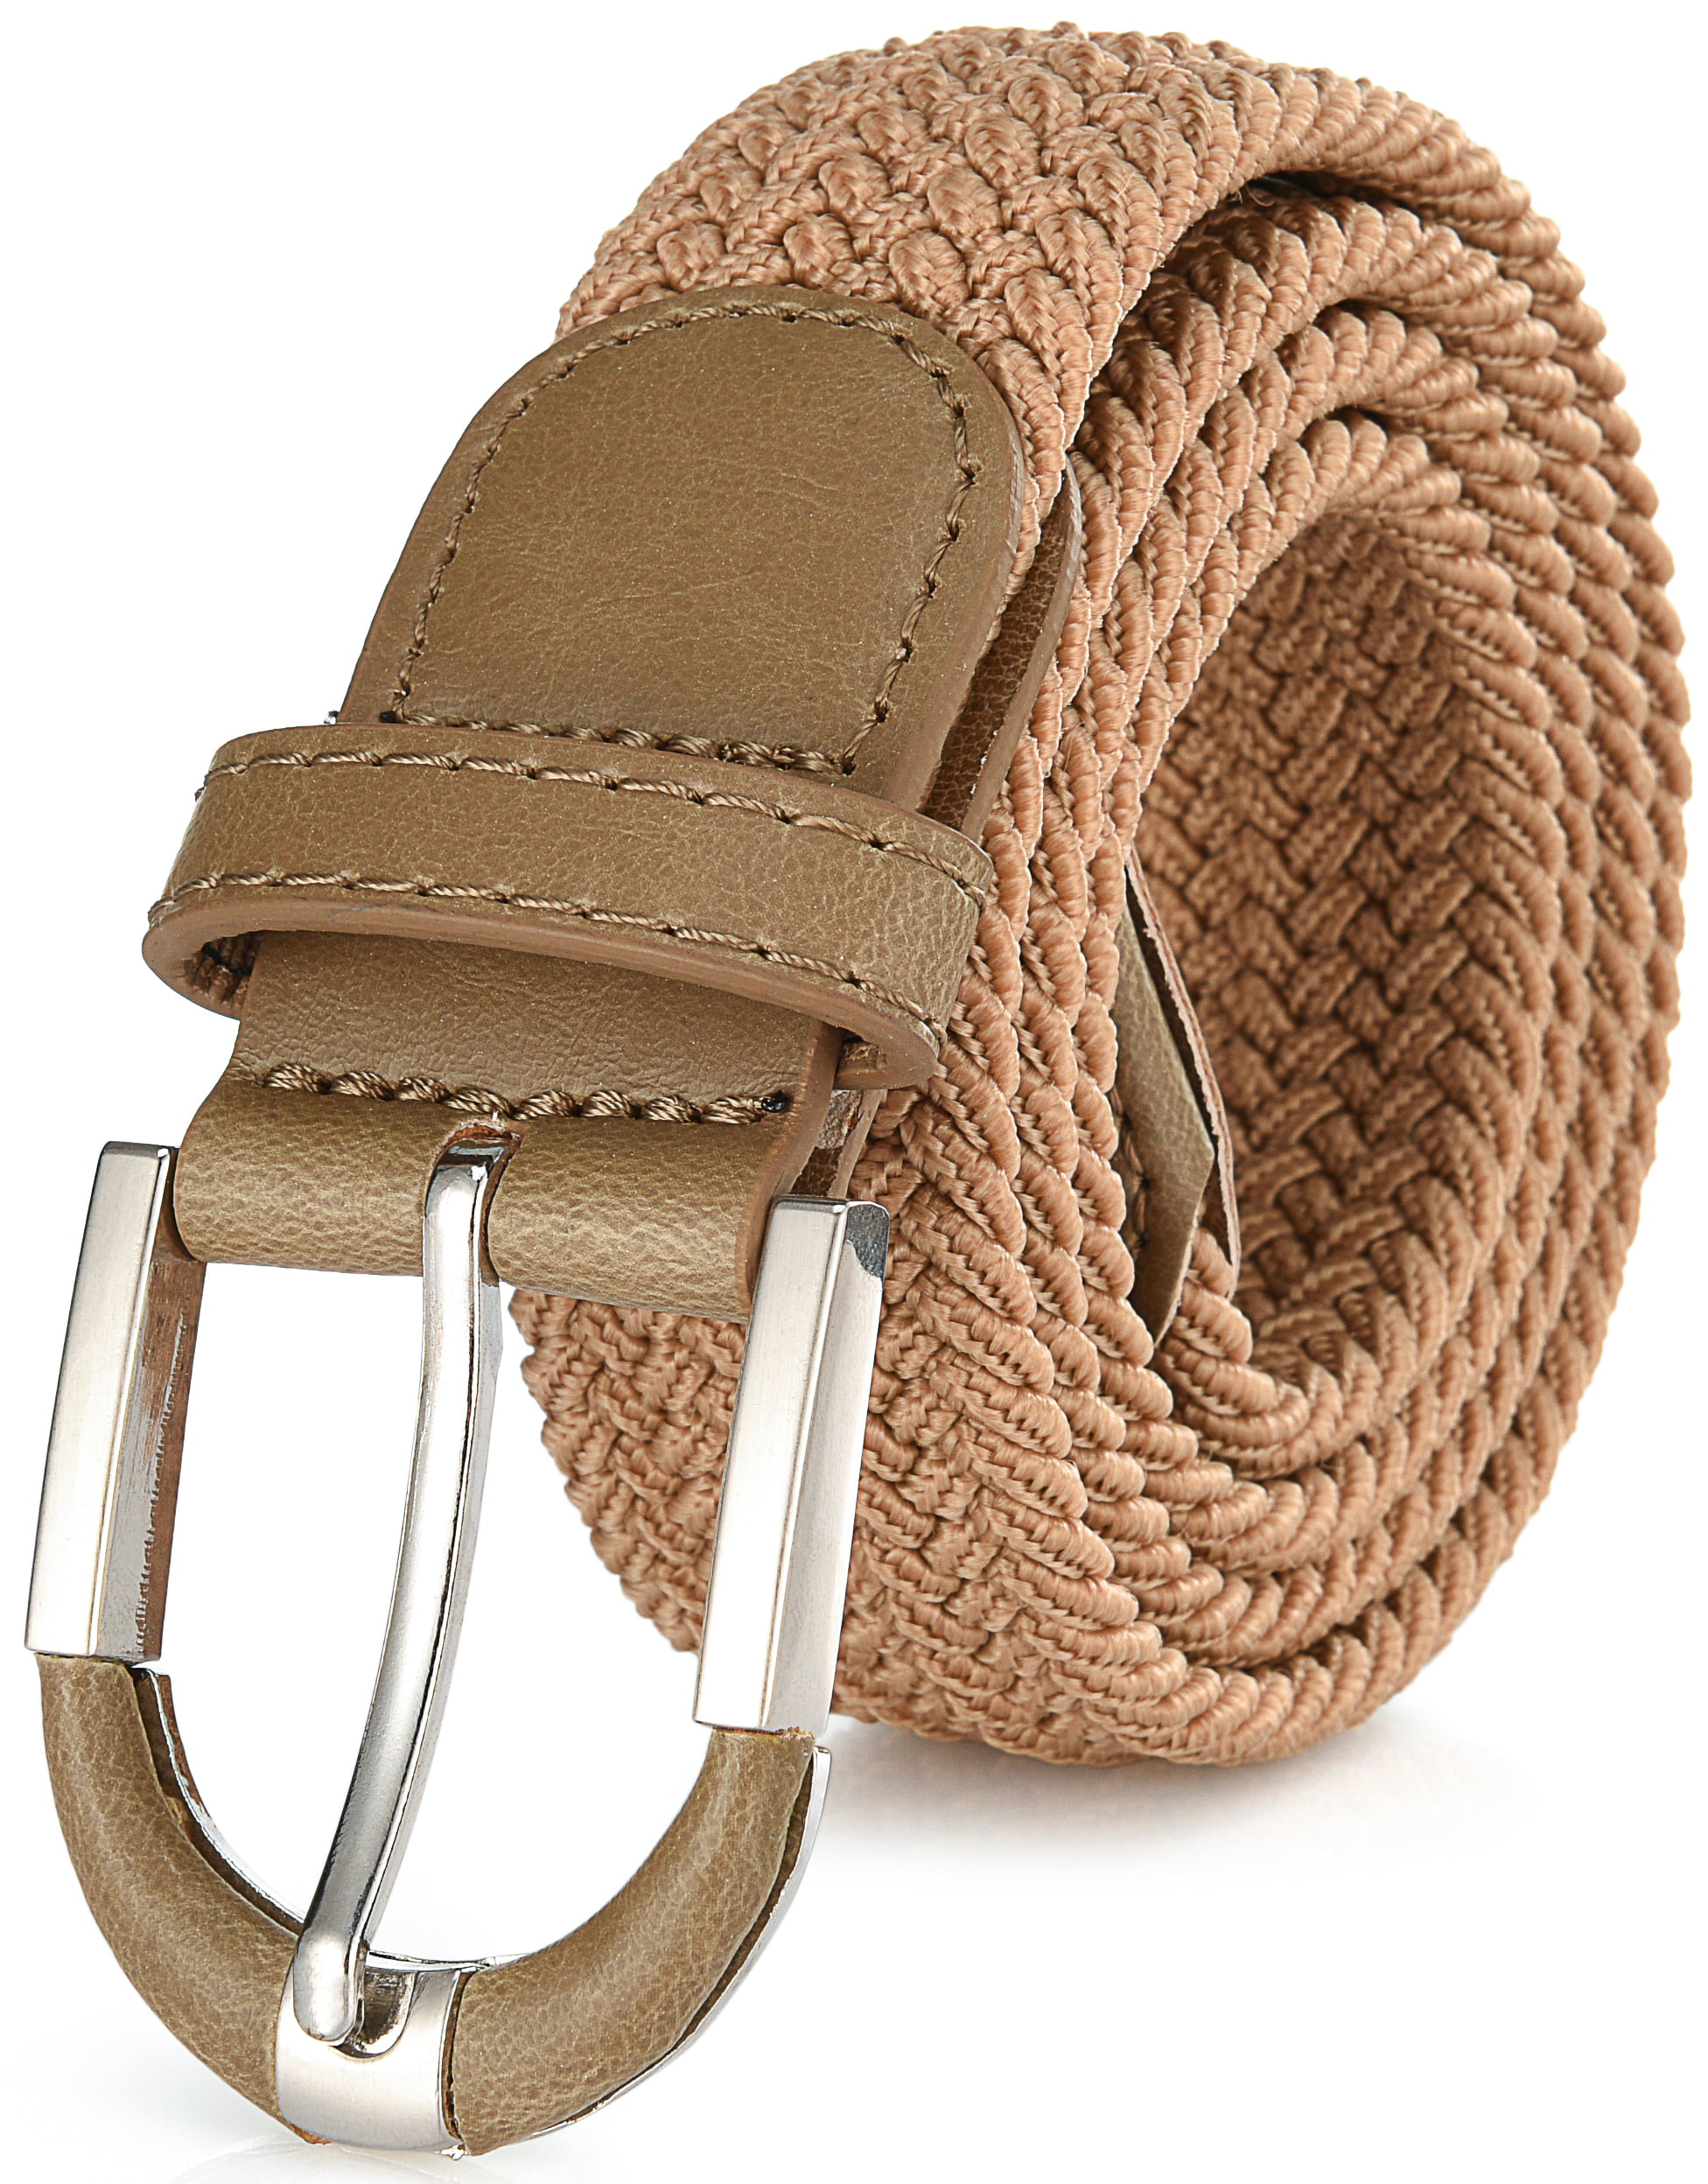 3XL Streeze Mens Elastic Fabric Woven Braided Stretch Webbed Belt with Leather Buckle Sizes Small 